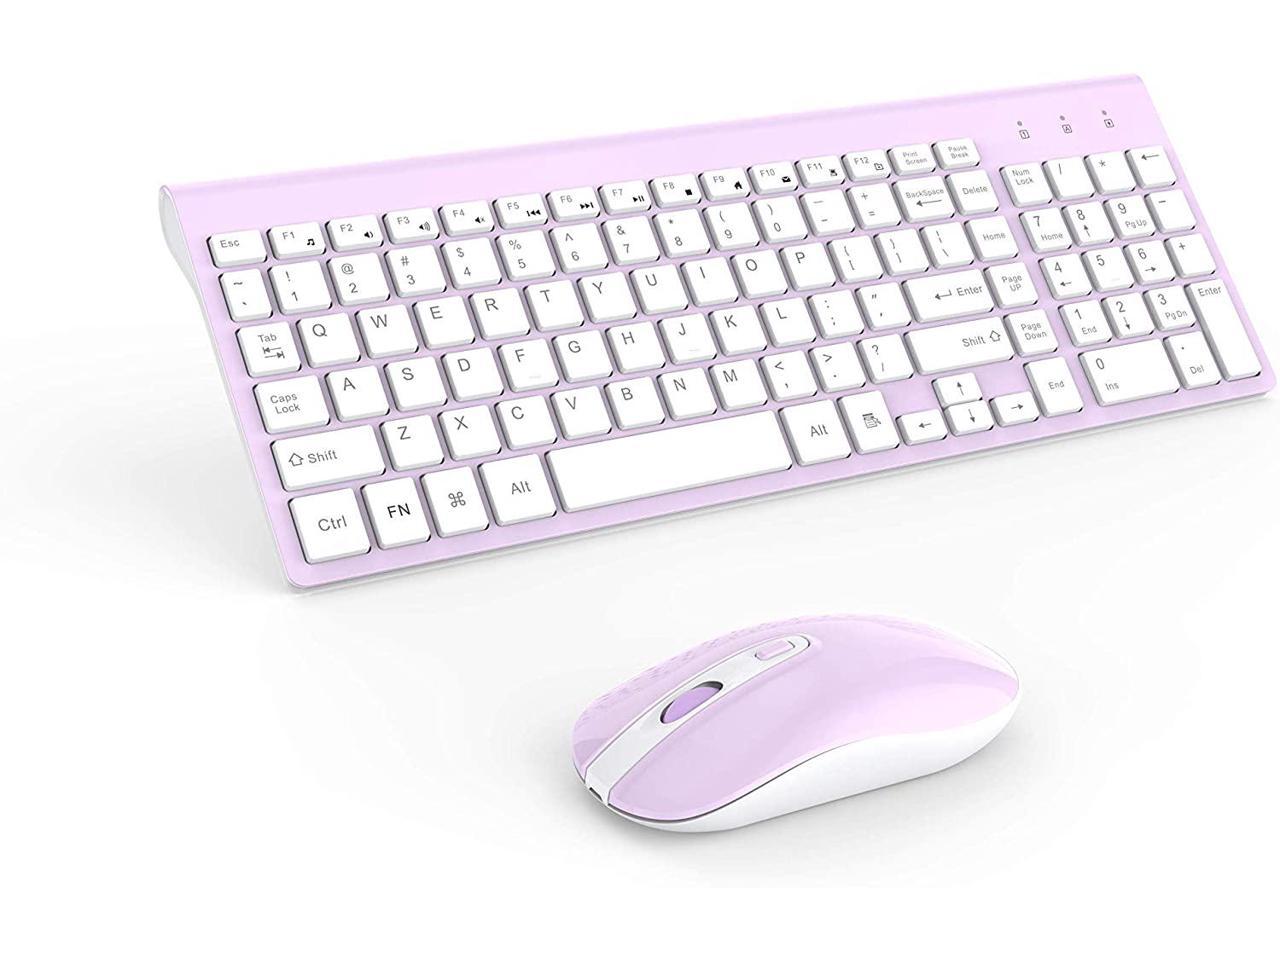 PC Laptop Bright Pink Cimetech Compact Full Size Wireless Keyboard and Mouse Set Less Noise Keys 2.4G Ultra-Thin Sleek Design for Windows Computer Notebook Wireless Keyboard Mouse Combo 